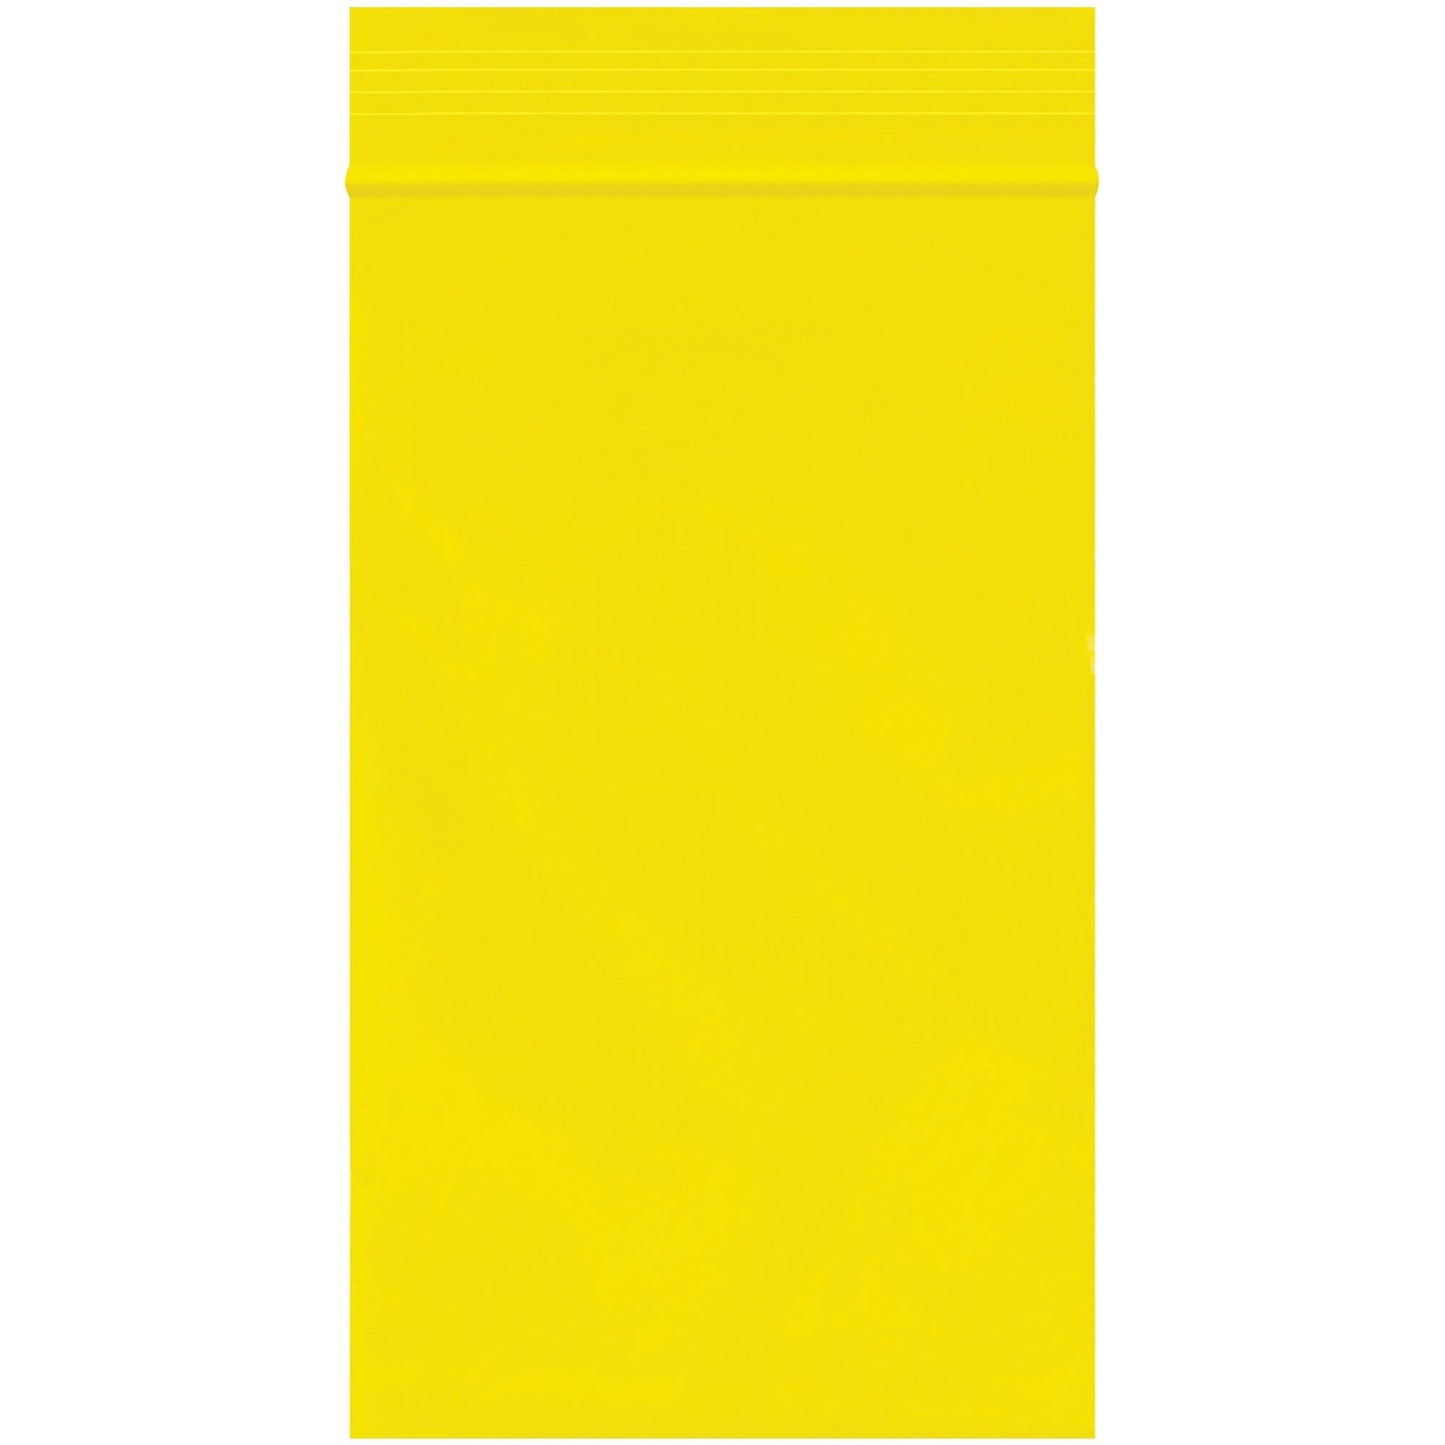 3 x 5" - 2 Mil Yellow Reclosable Poly Bags - PB3550Y